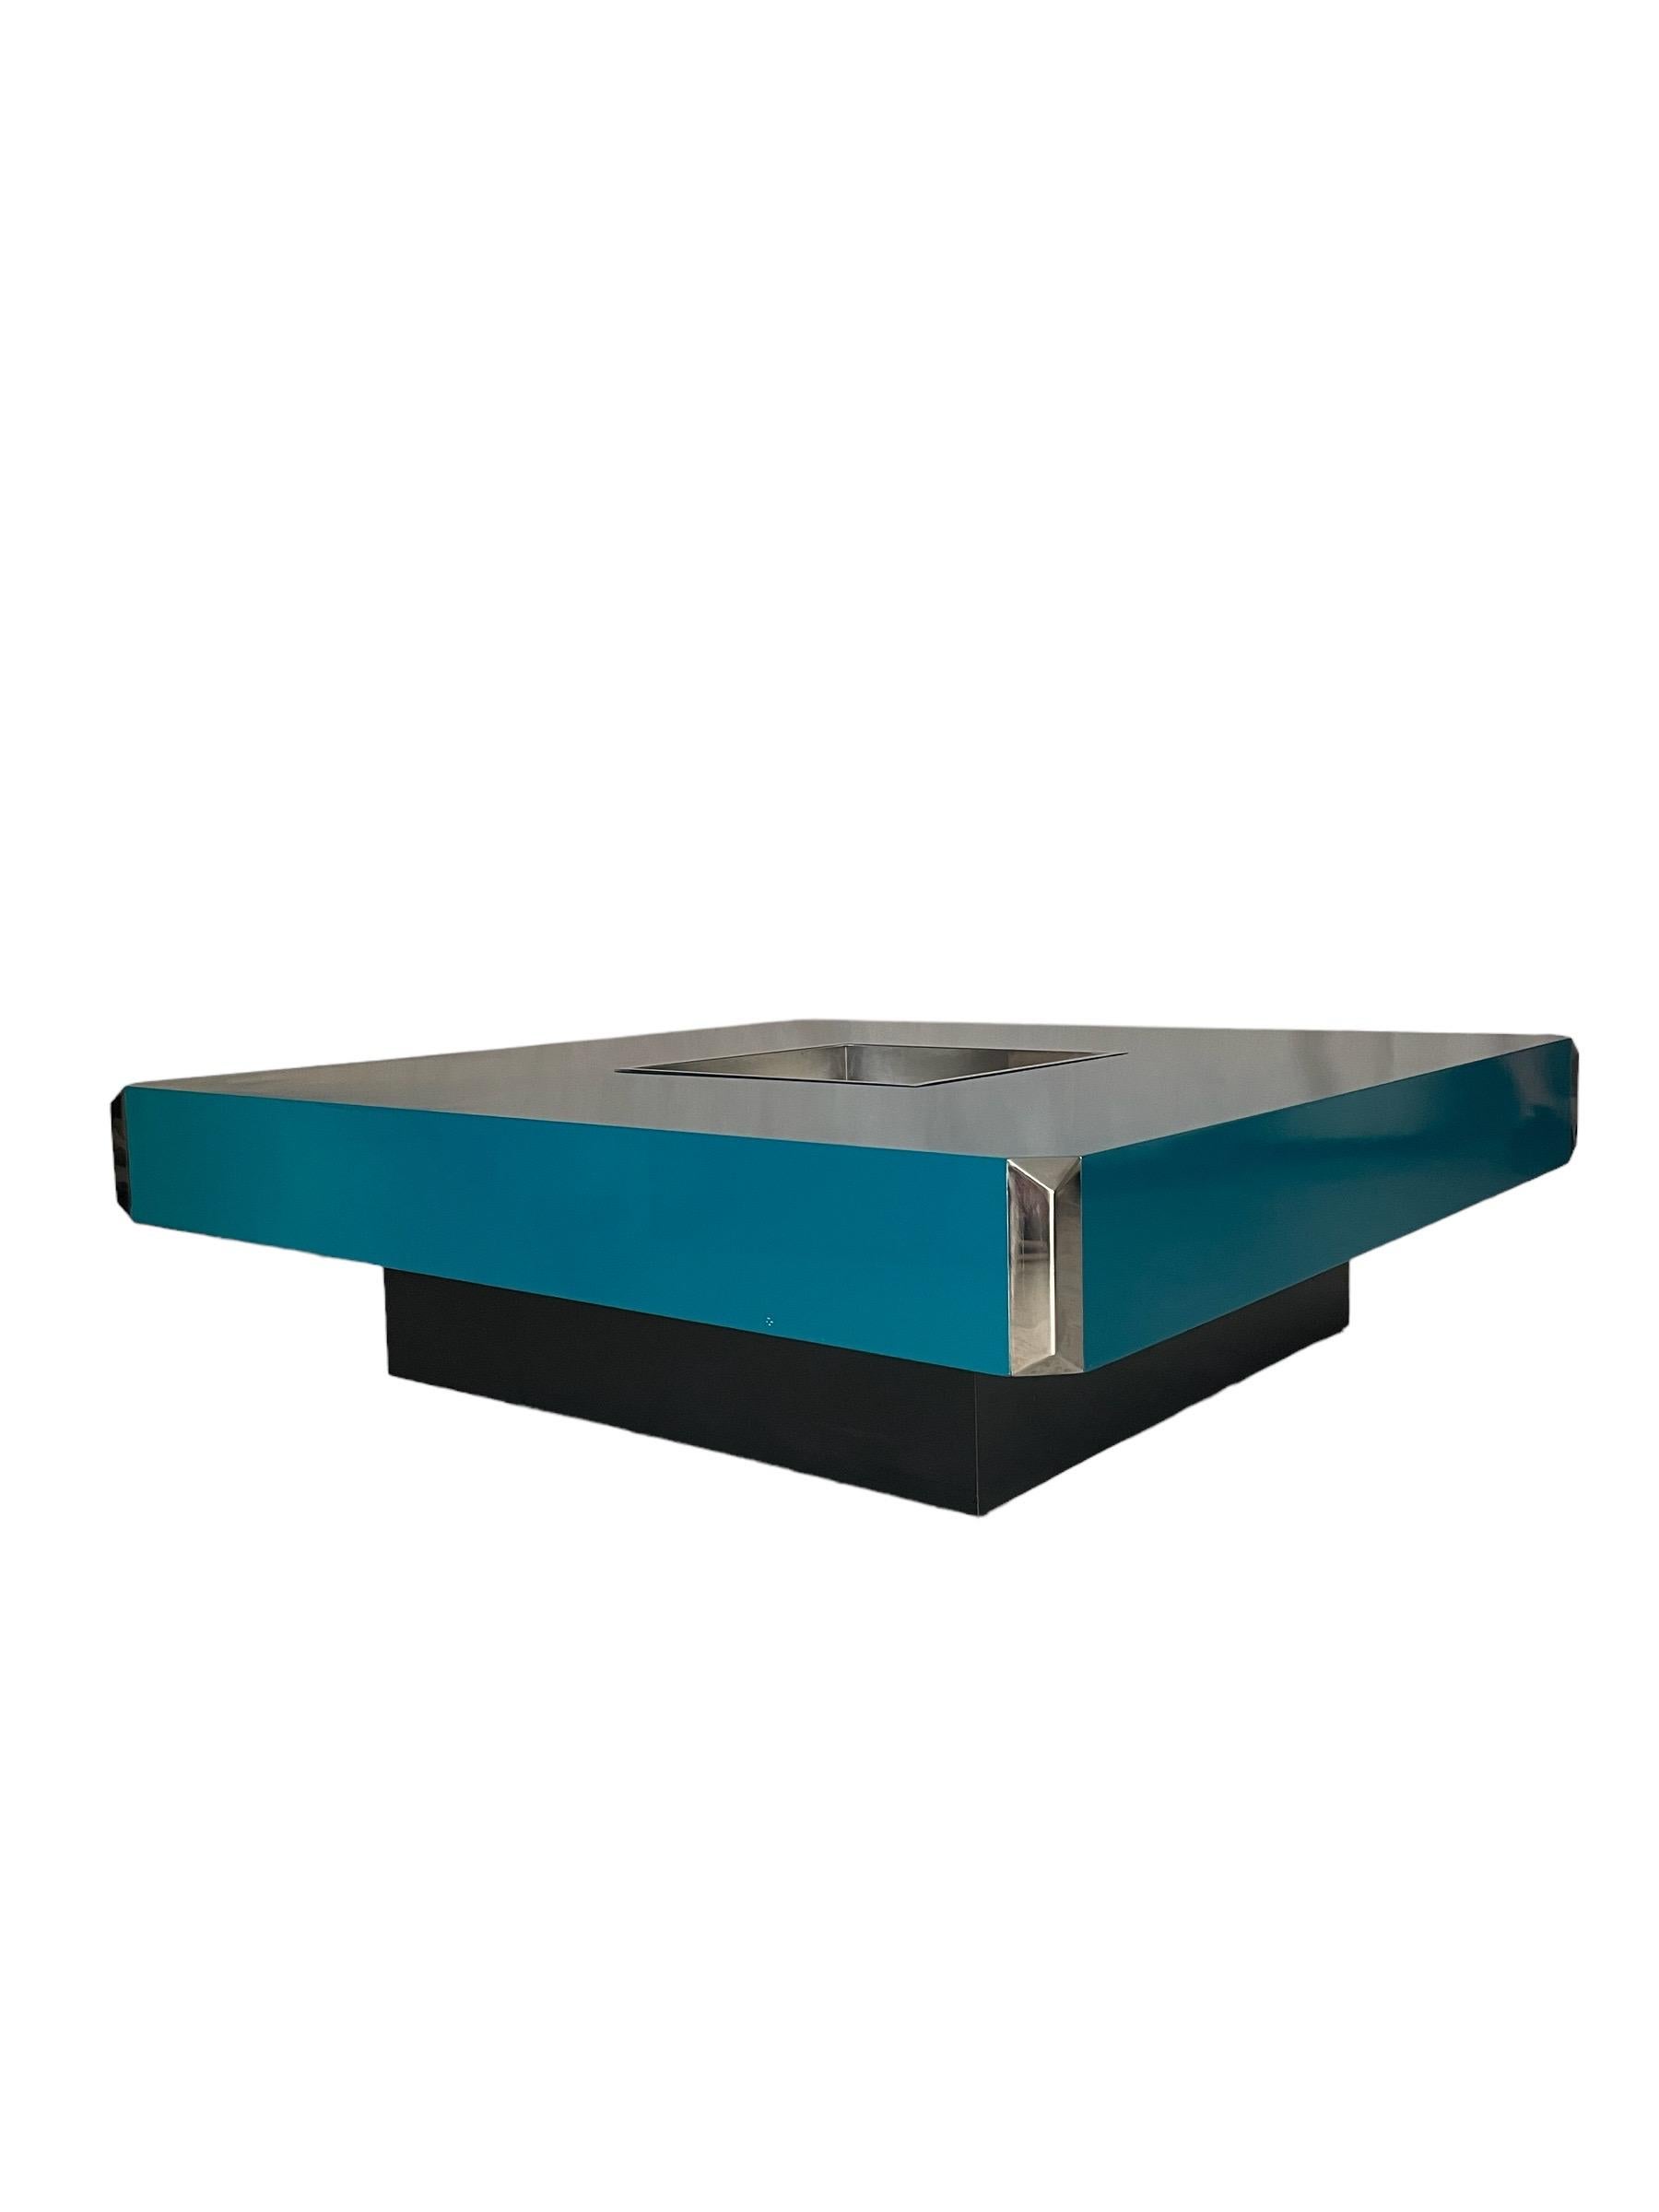 Large square Alveo Model table designed by Willy Rizzo and edited by Mario Sabot. Central steel bar and metal corners, all original. The base of black color.
Lacquered in petrol blue. France 70s.